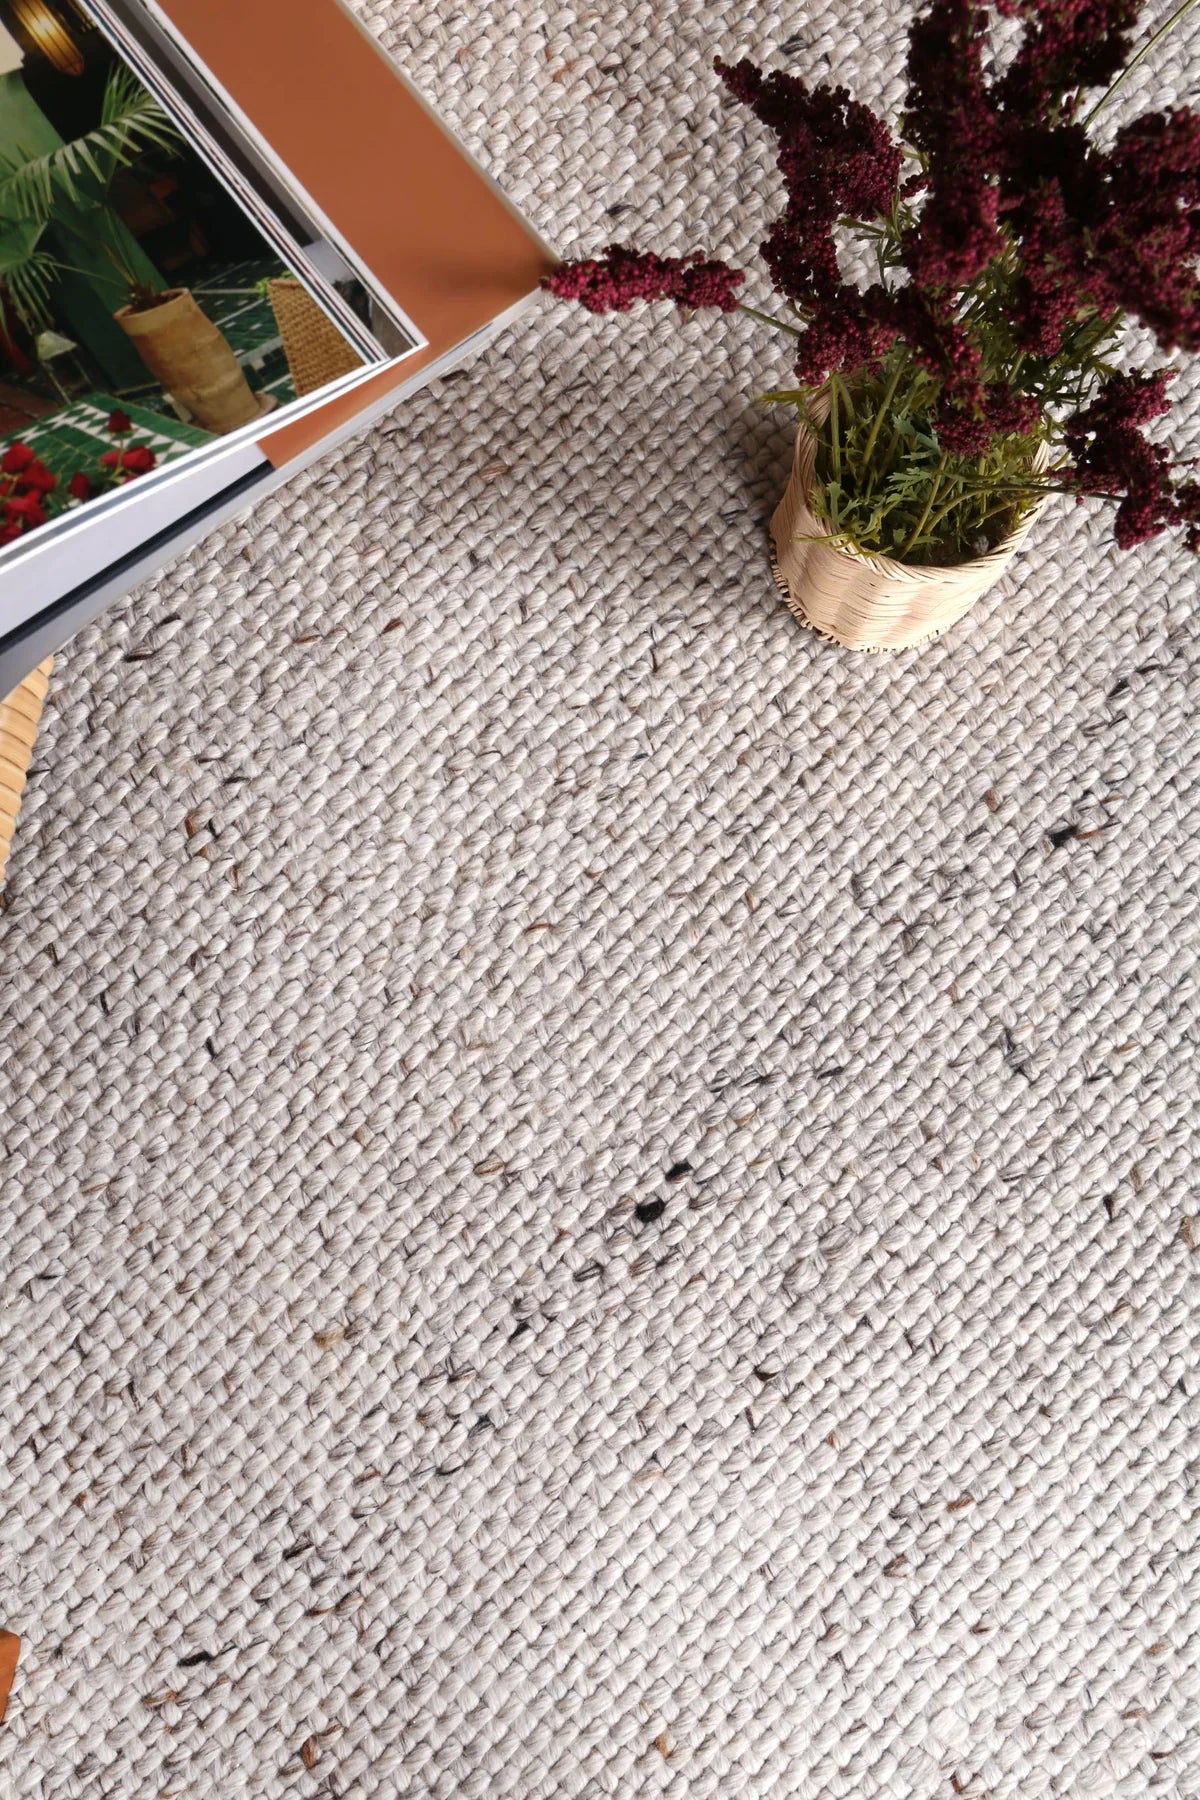 Salar Gunj Collection rug in grey laid out, highlighting its versatile design and size options.